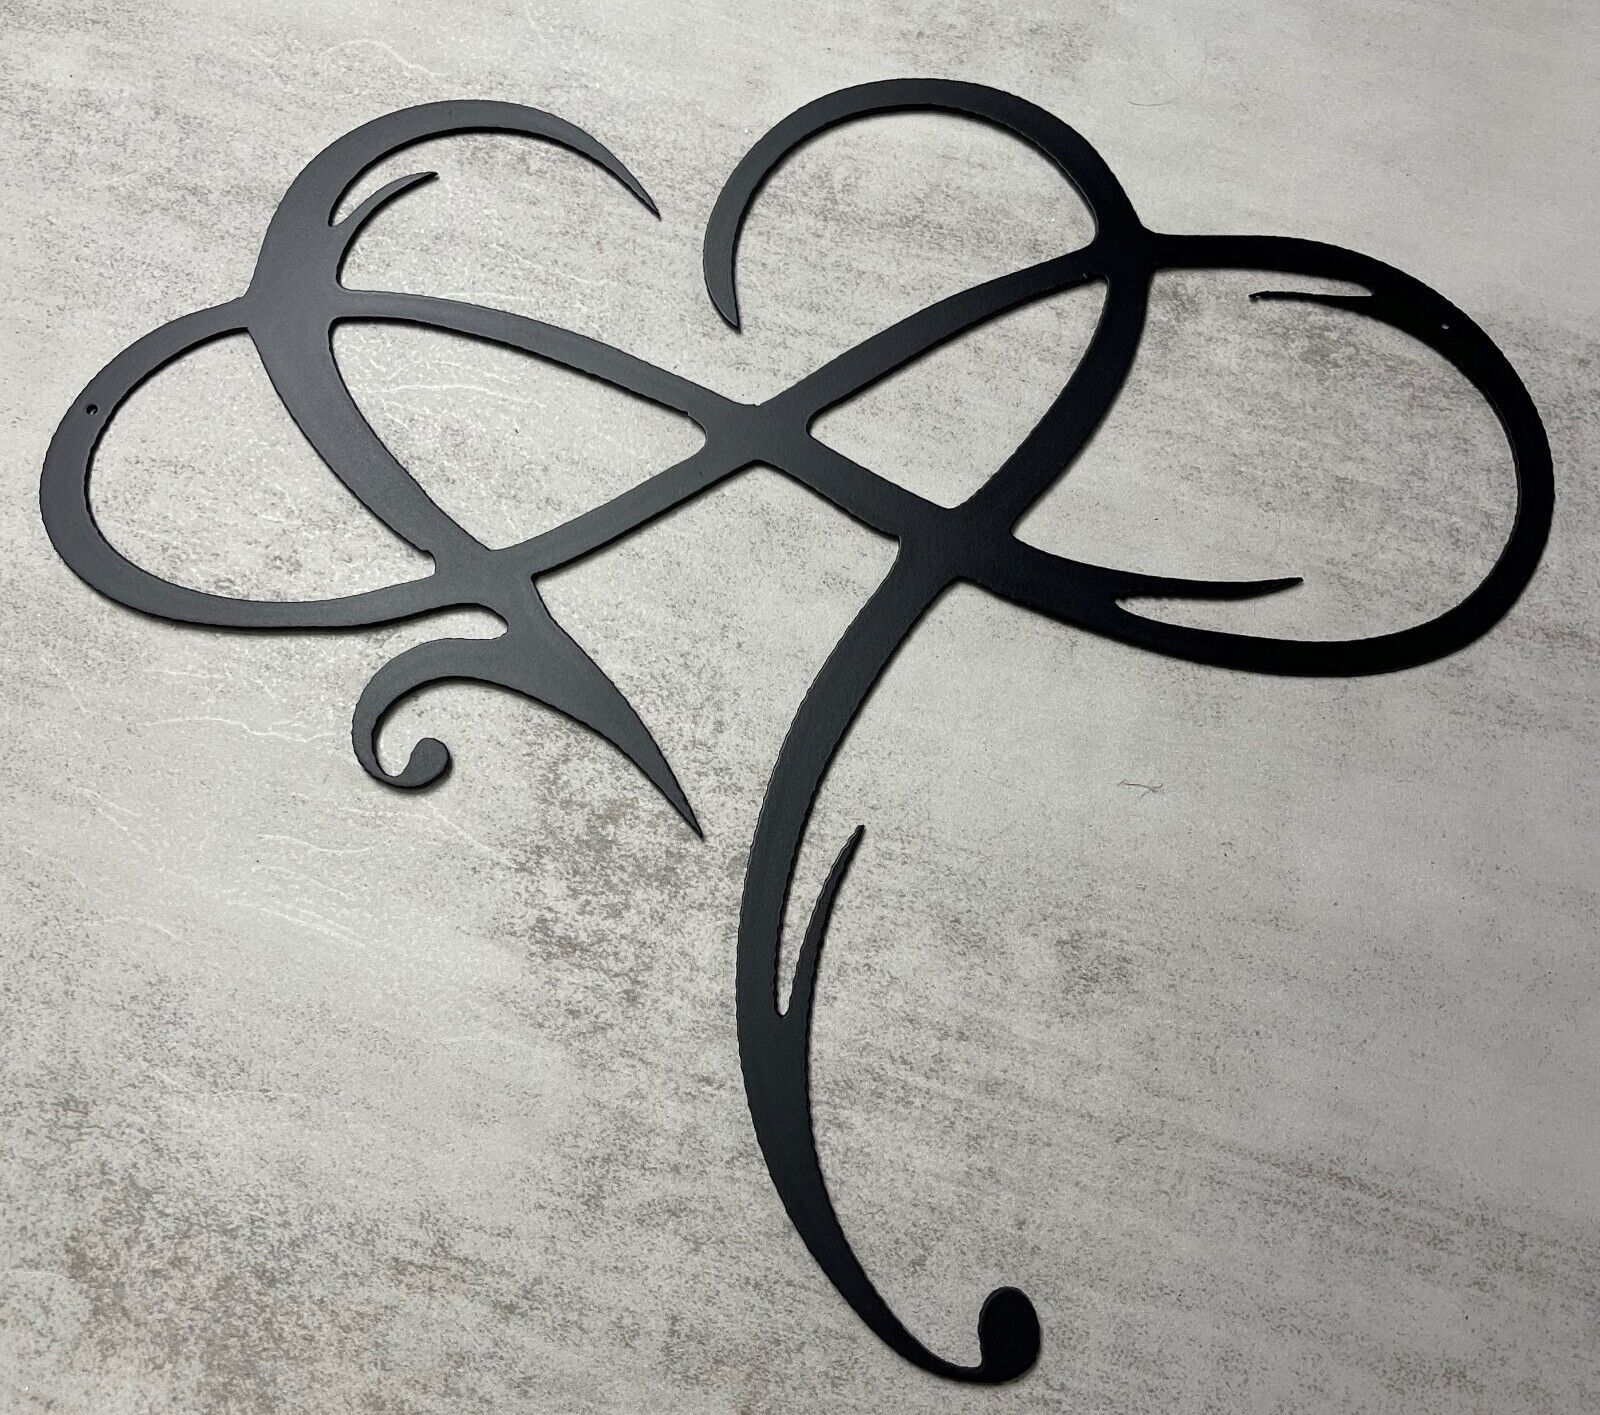 Primary image for Infinity Heart - Metal Wall Art - Black  21 1/2" x 24 1/4"